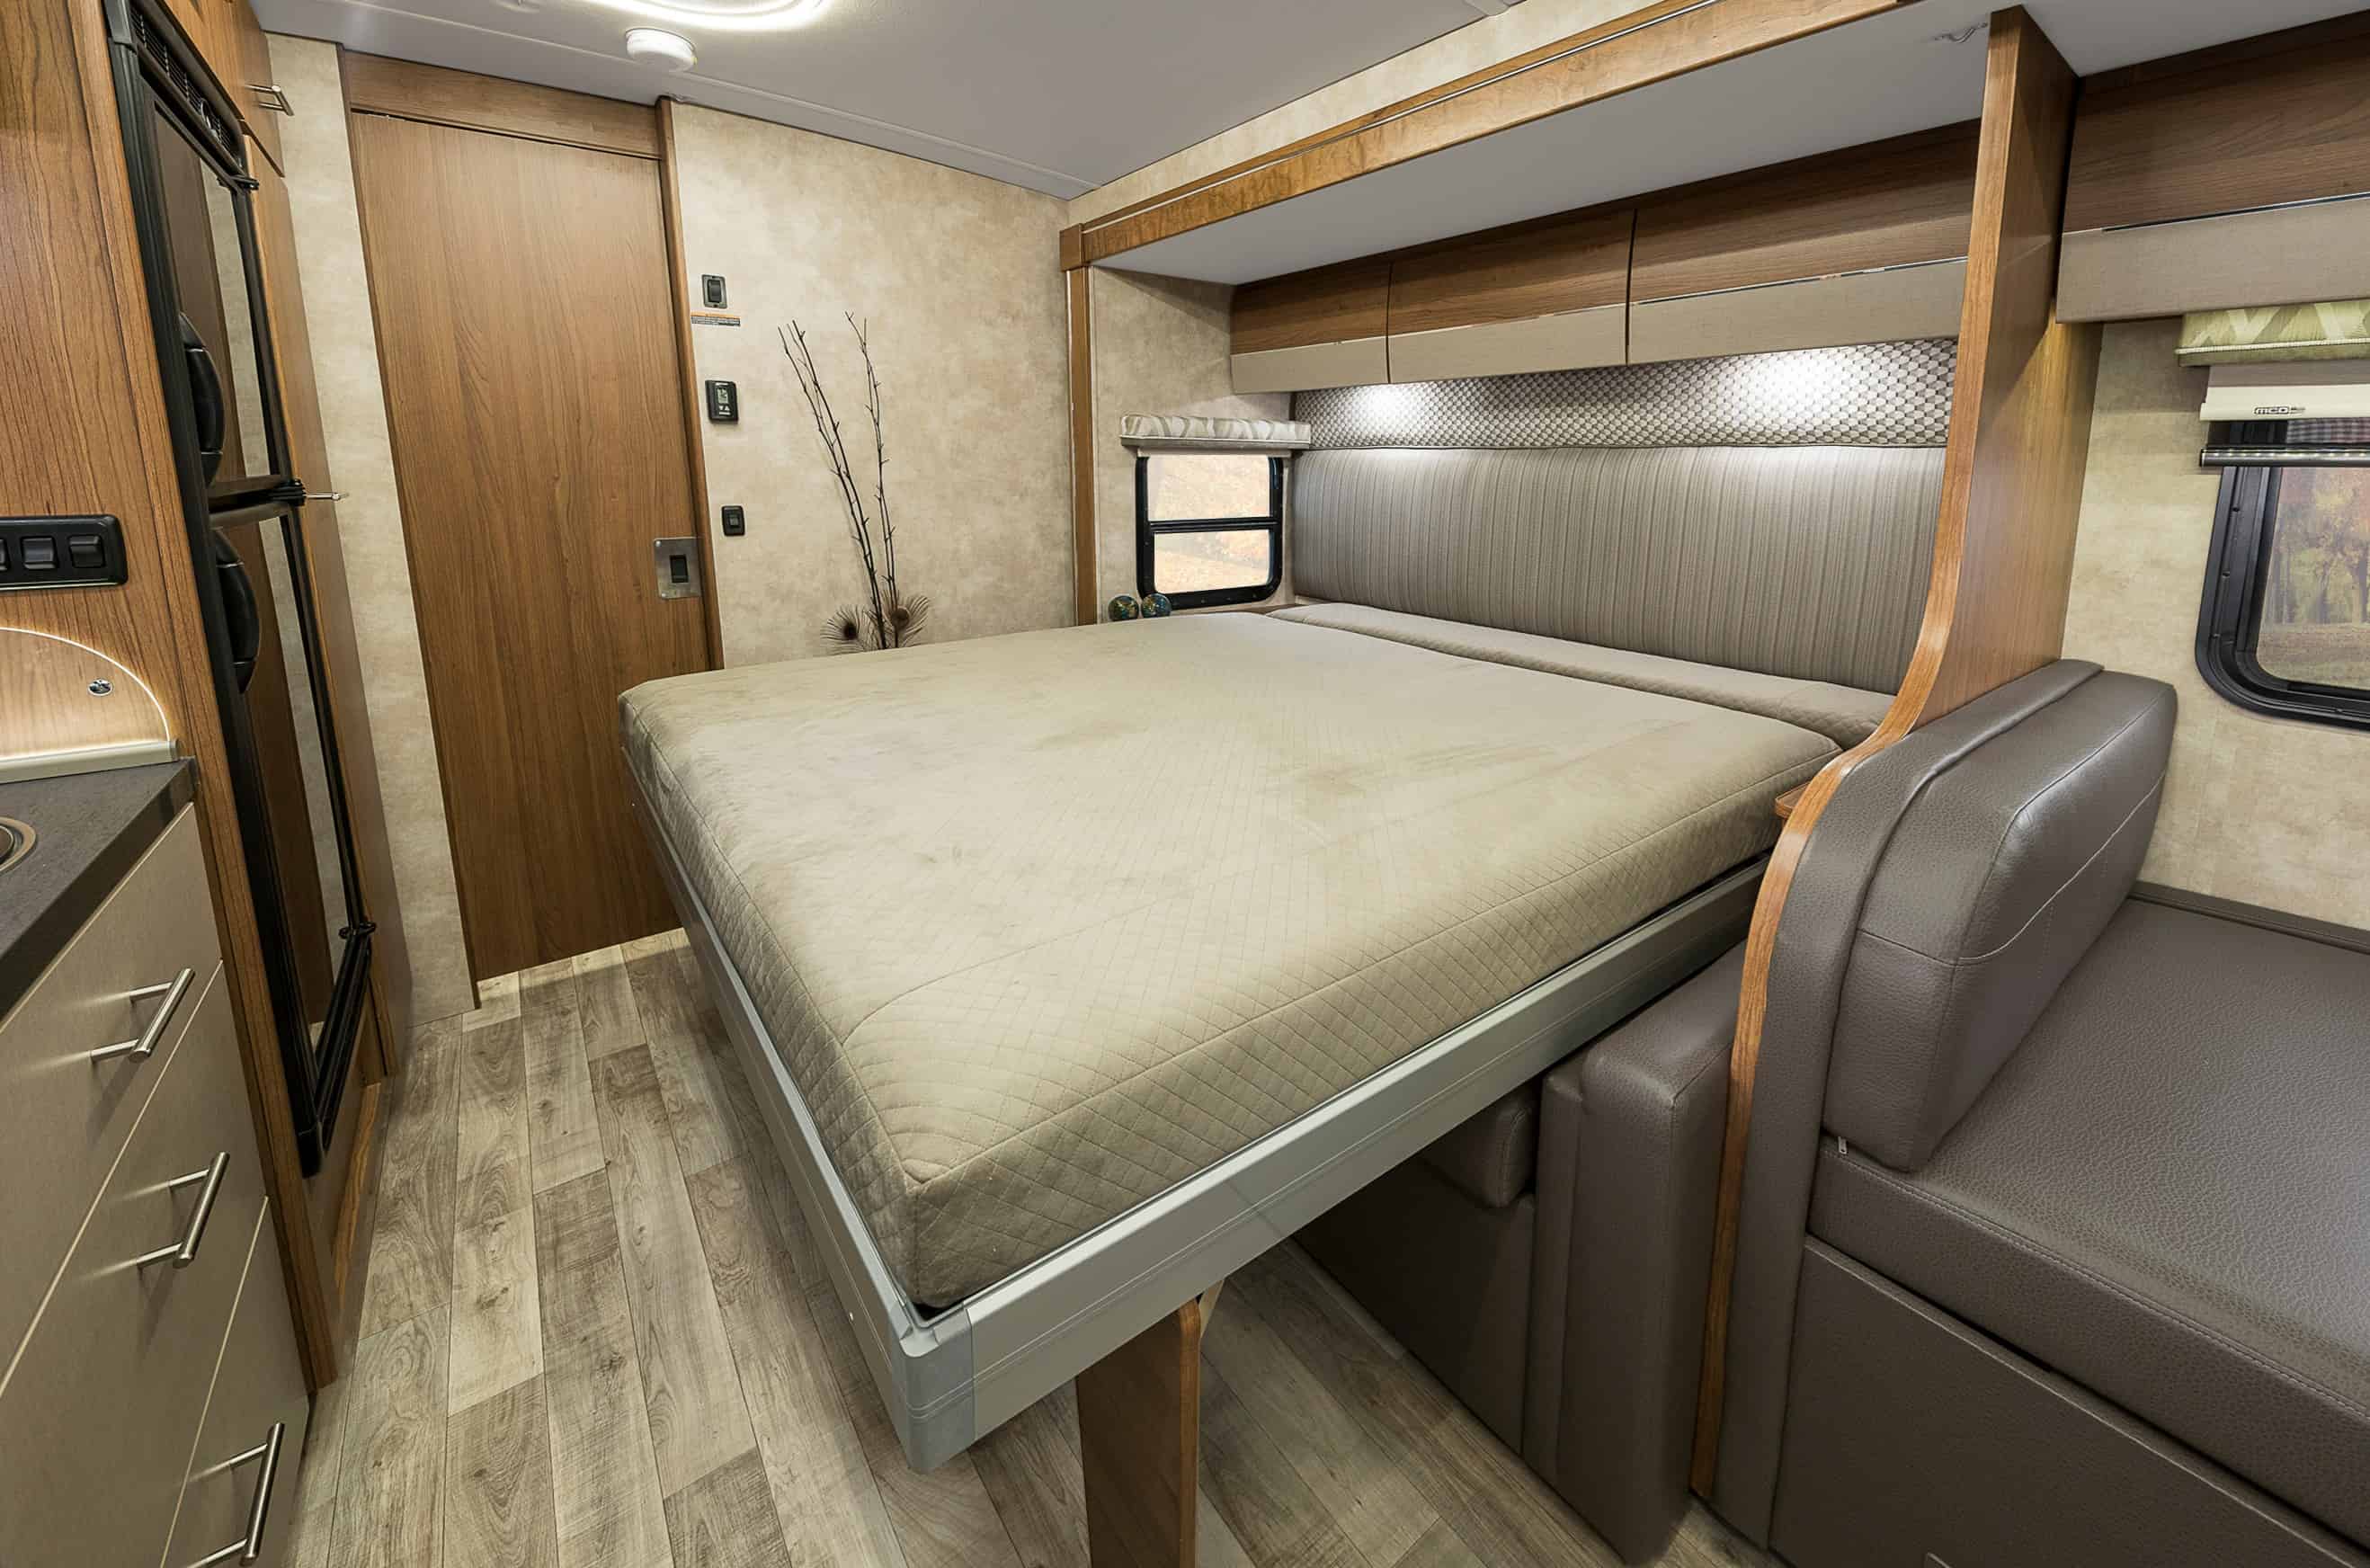 Travel Trailers With Murphy Beds, Travel Trailer With Queen Size Bunk Beds